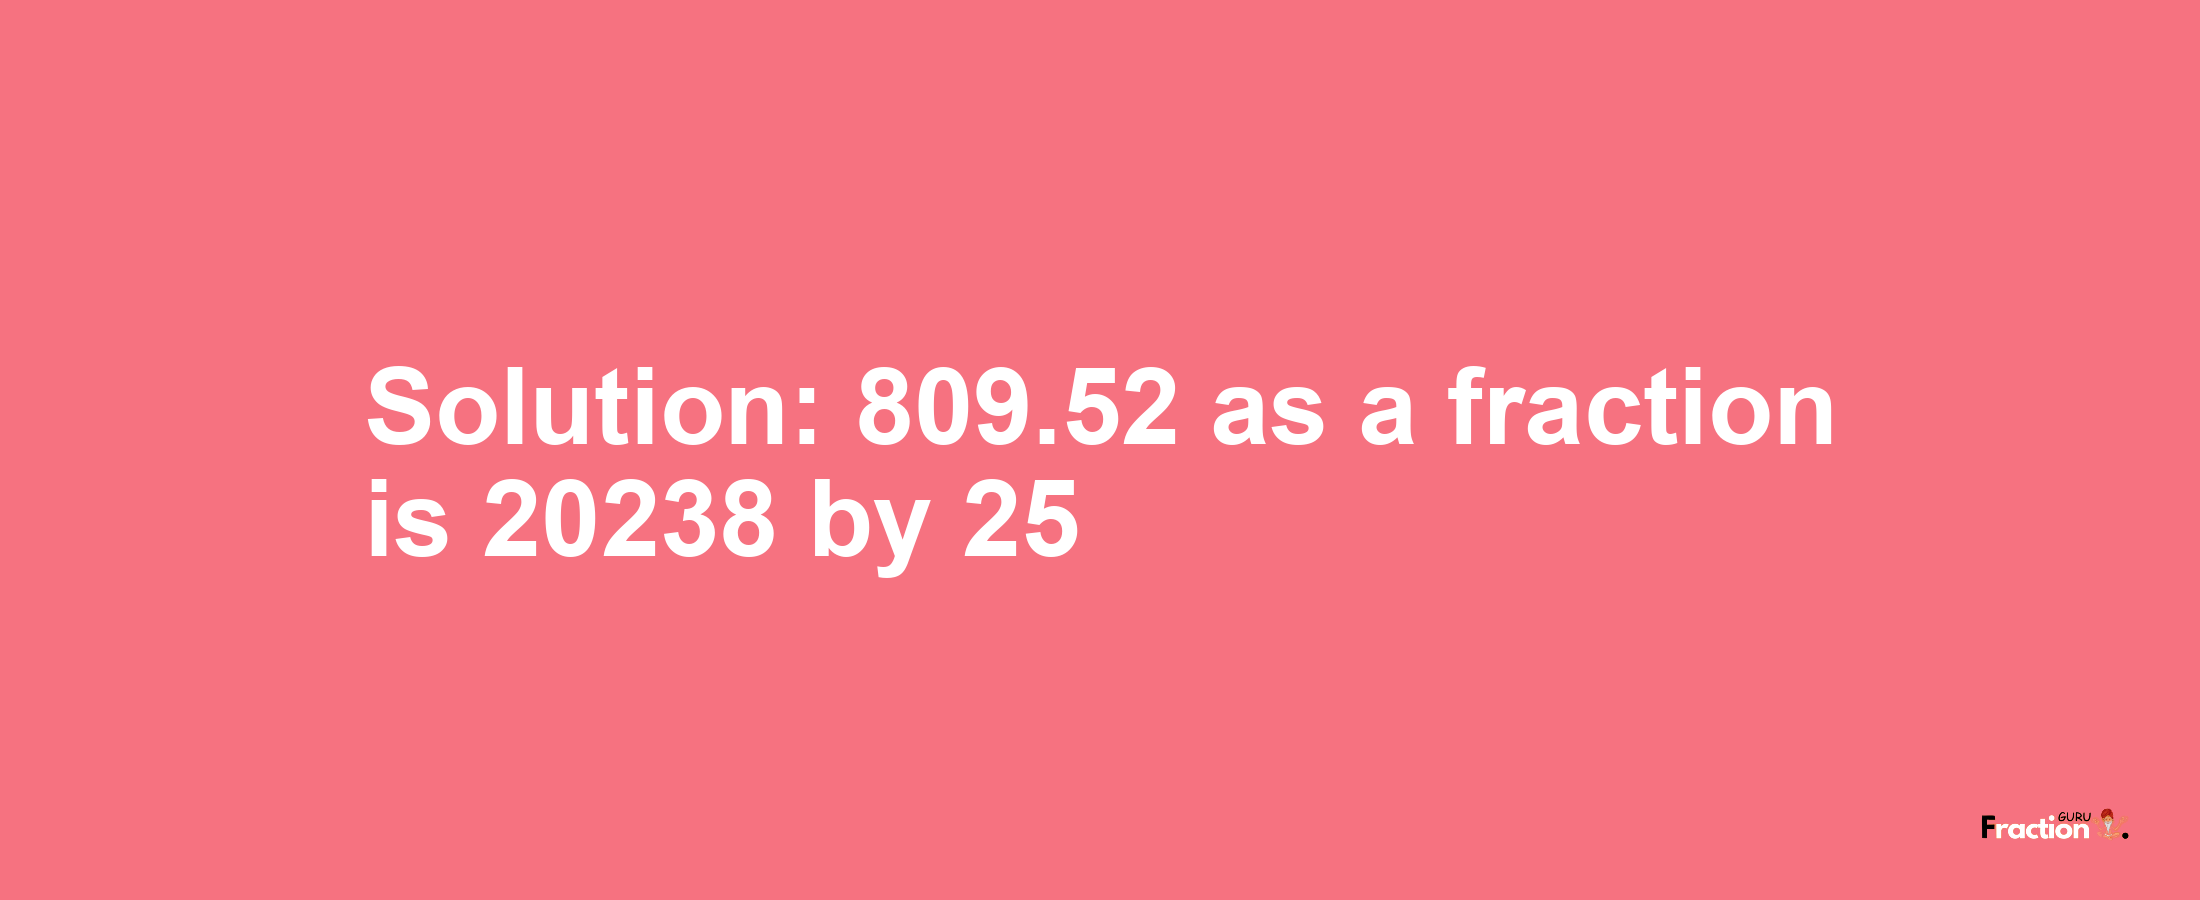 Solution:809.52 as a fraction is 20238/25